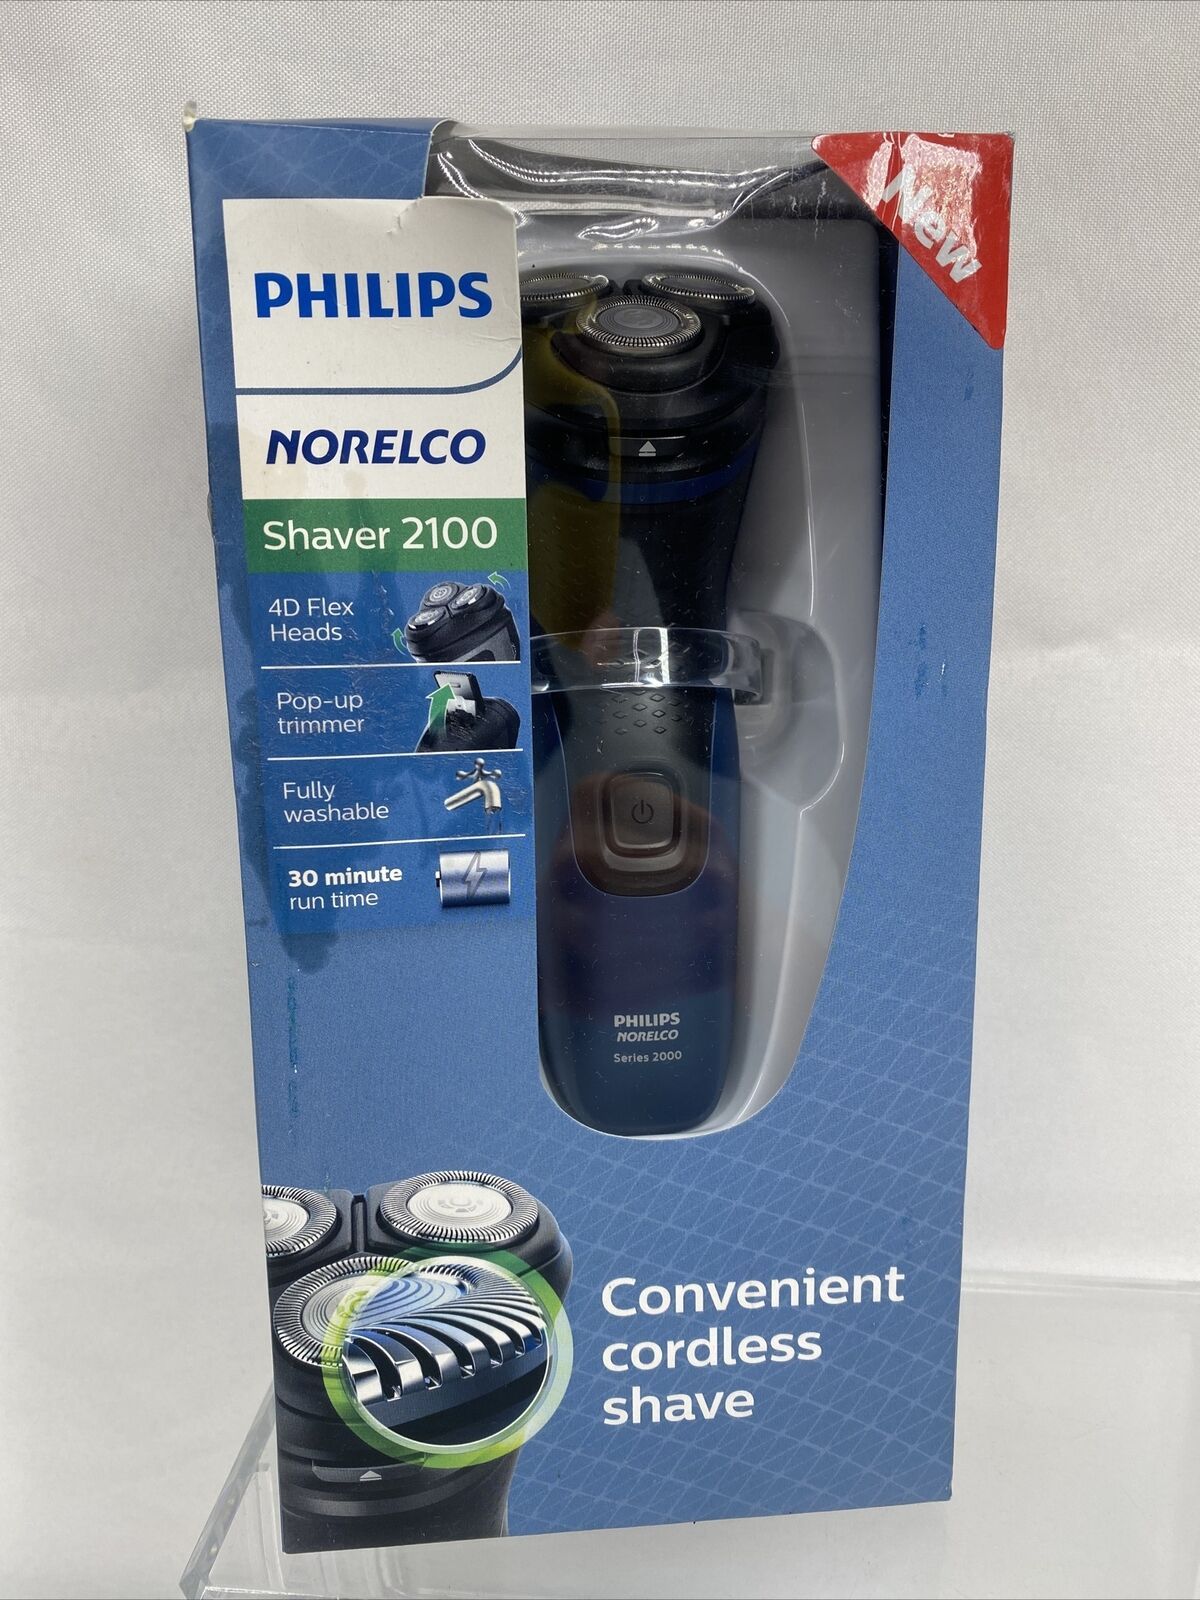 Philips Norelco Cordless Shaver 2100 S1111/81 4D Flex Heads Pop Up ...